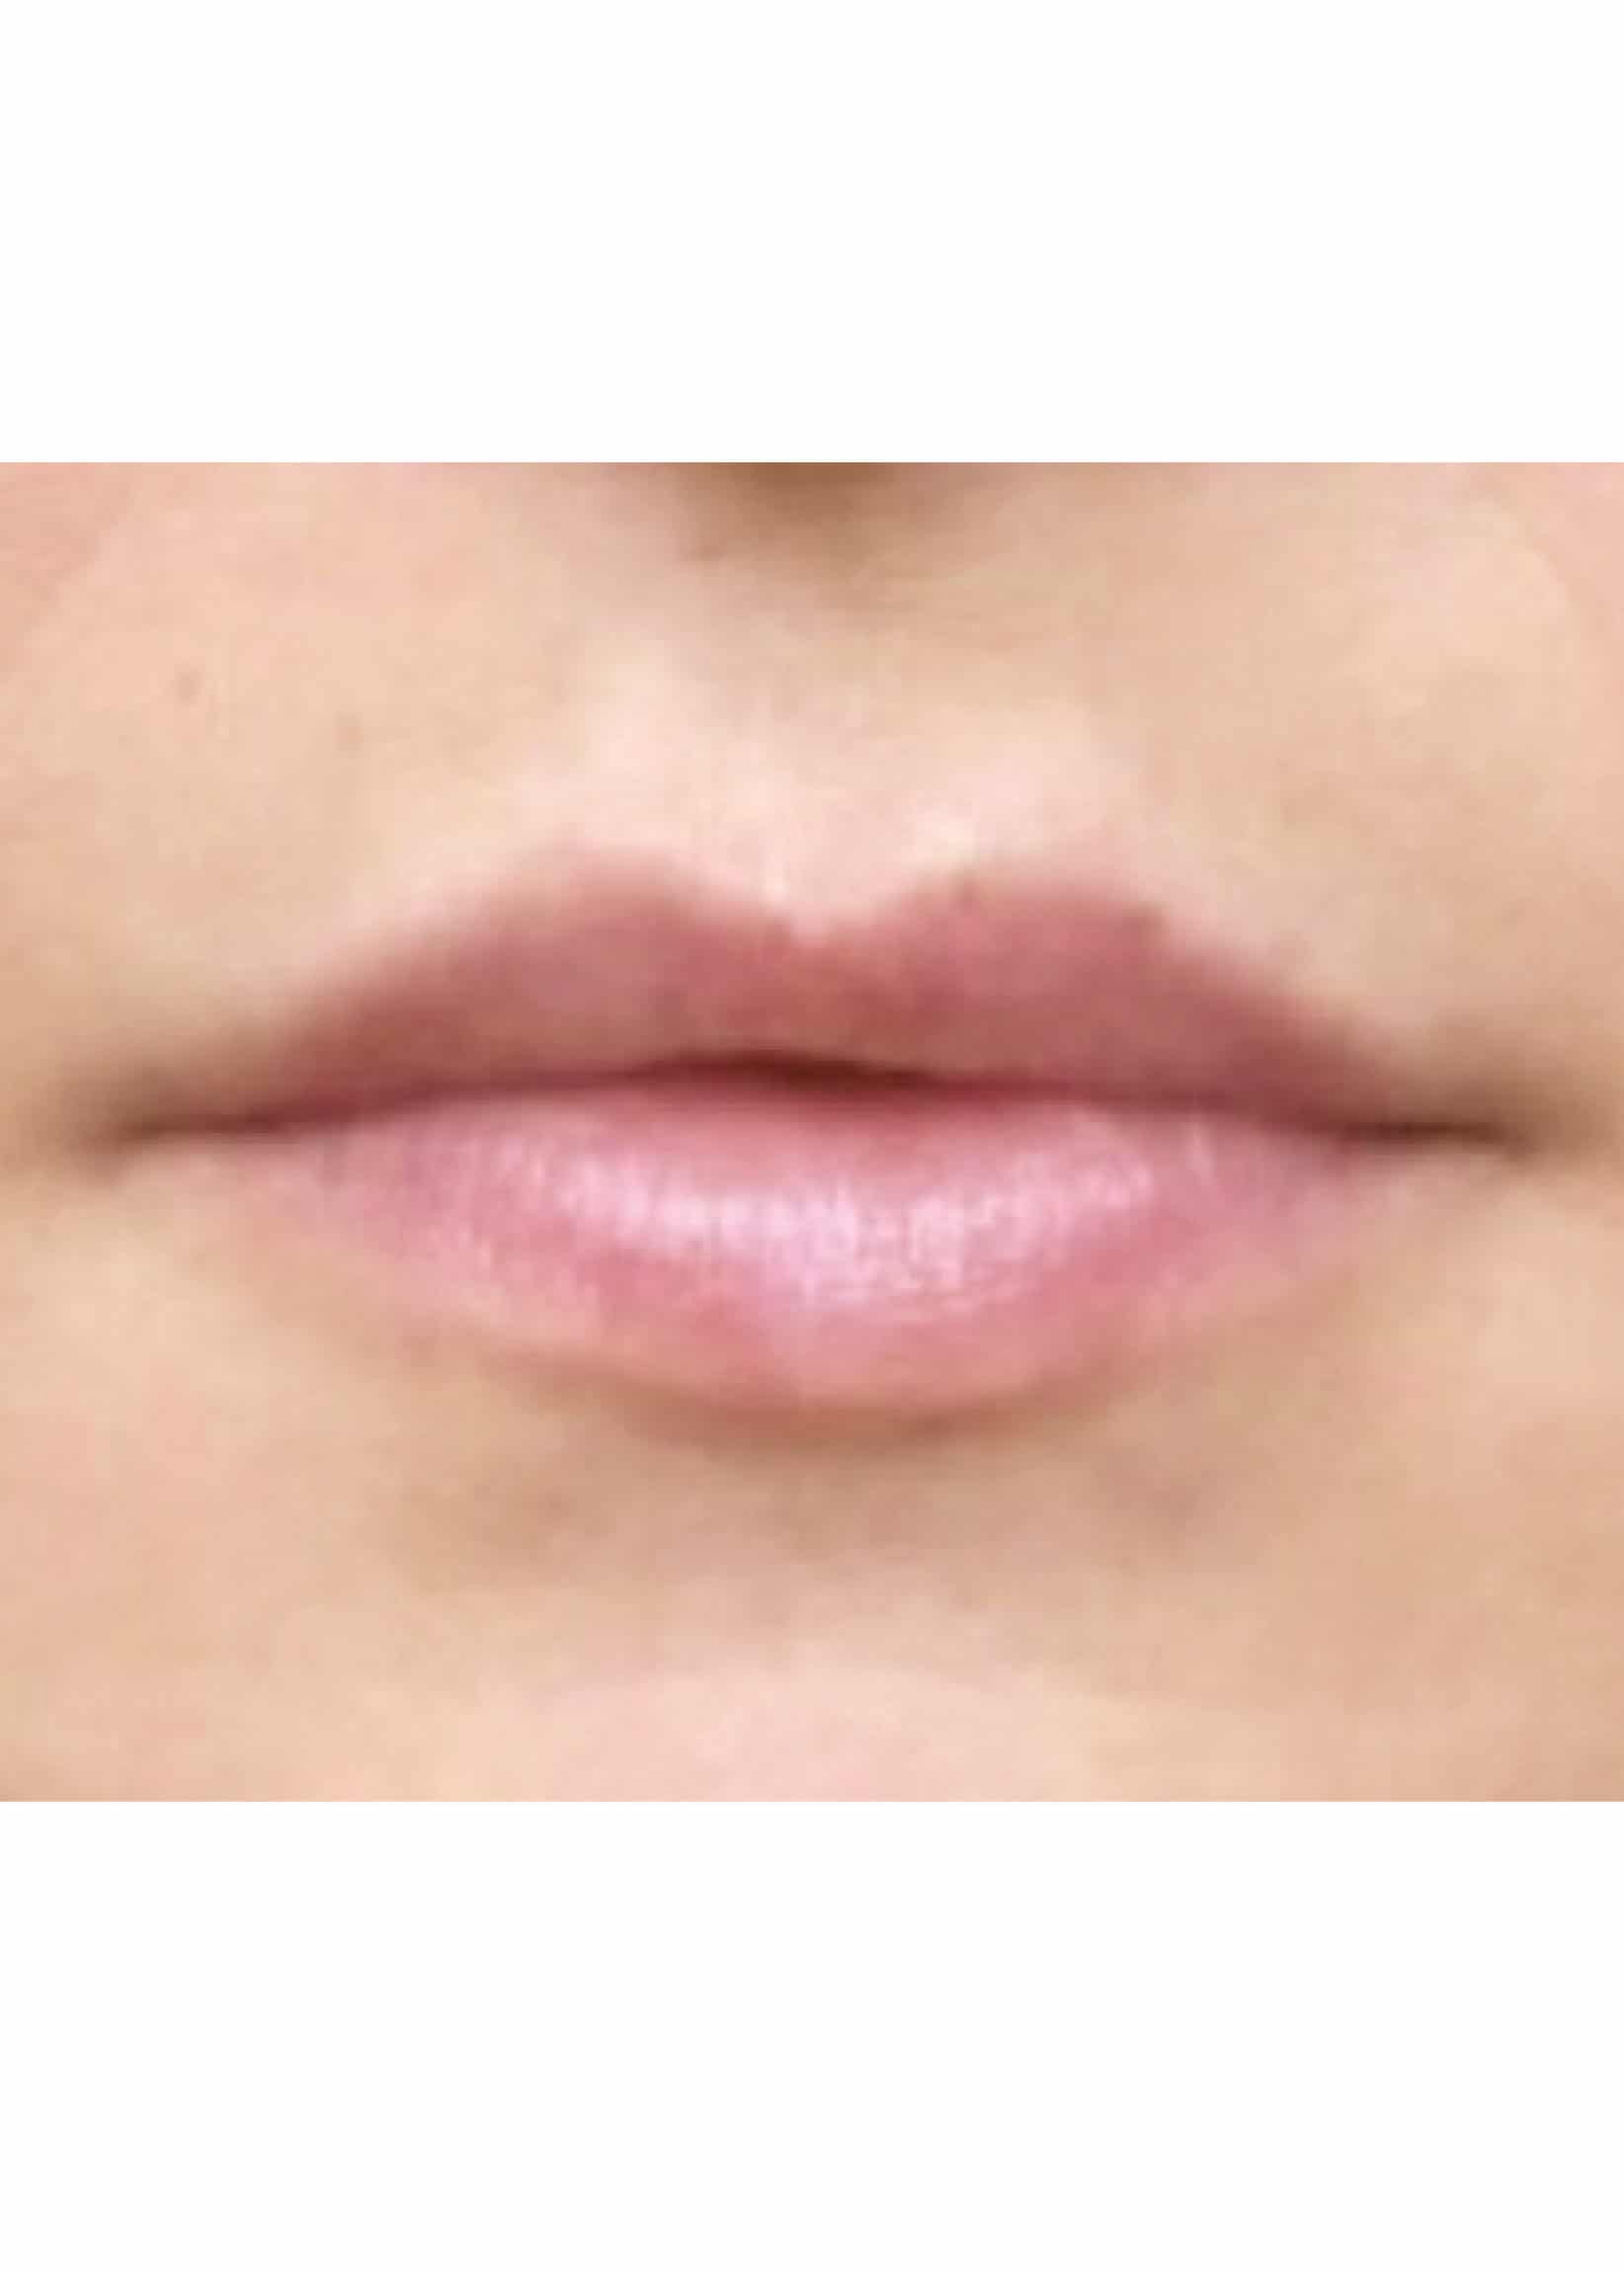 TheSkinCenter ProviderPages TiffaneyBeddow LipFiller Before 2 scaled 1